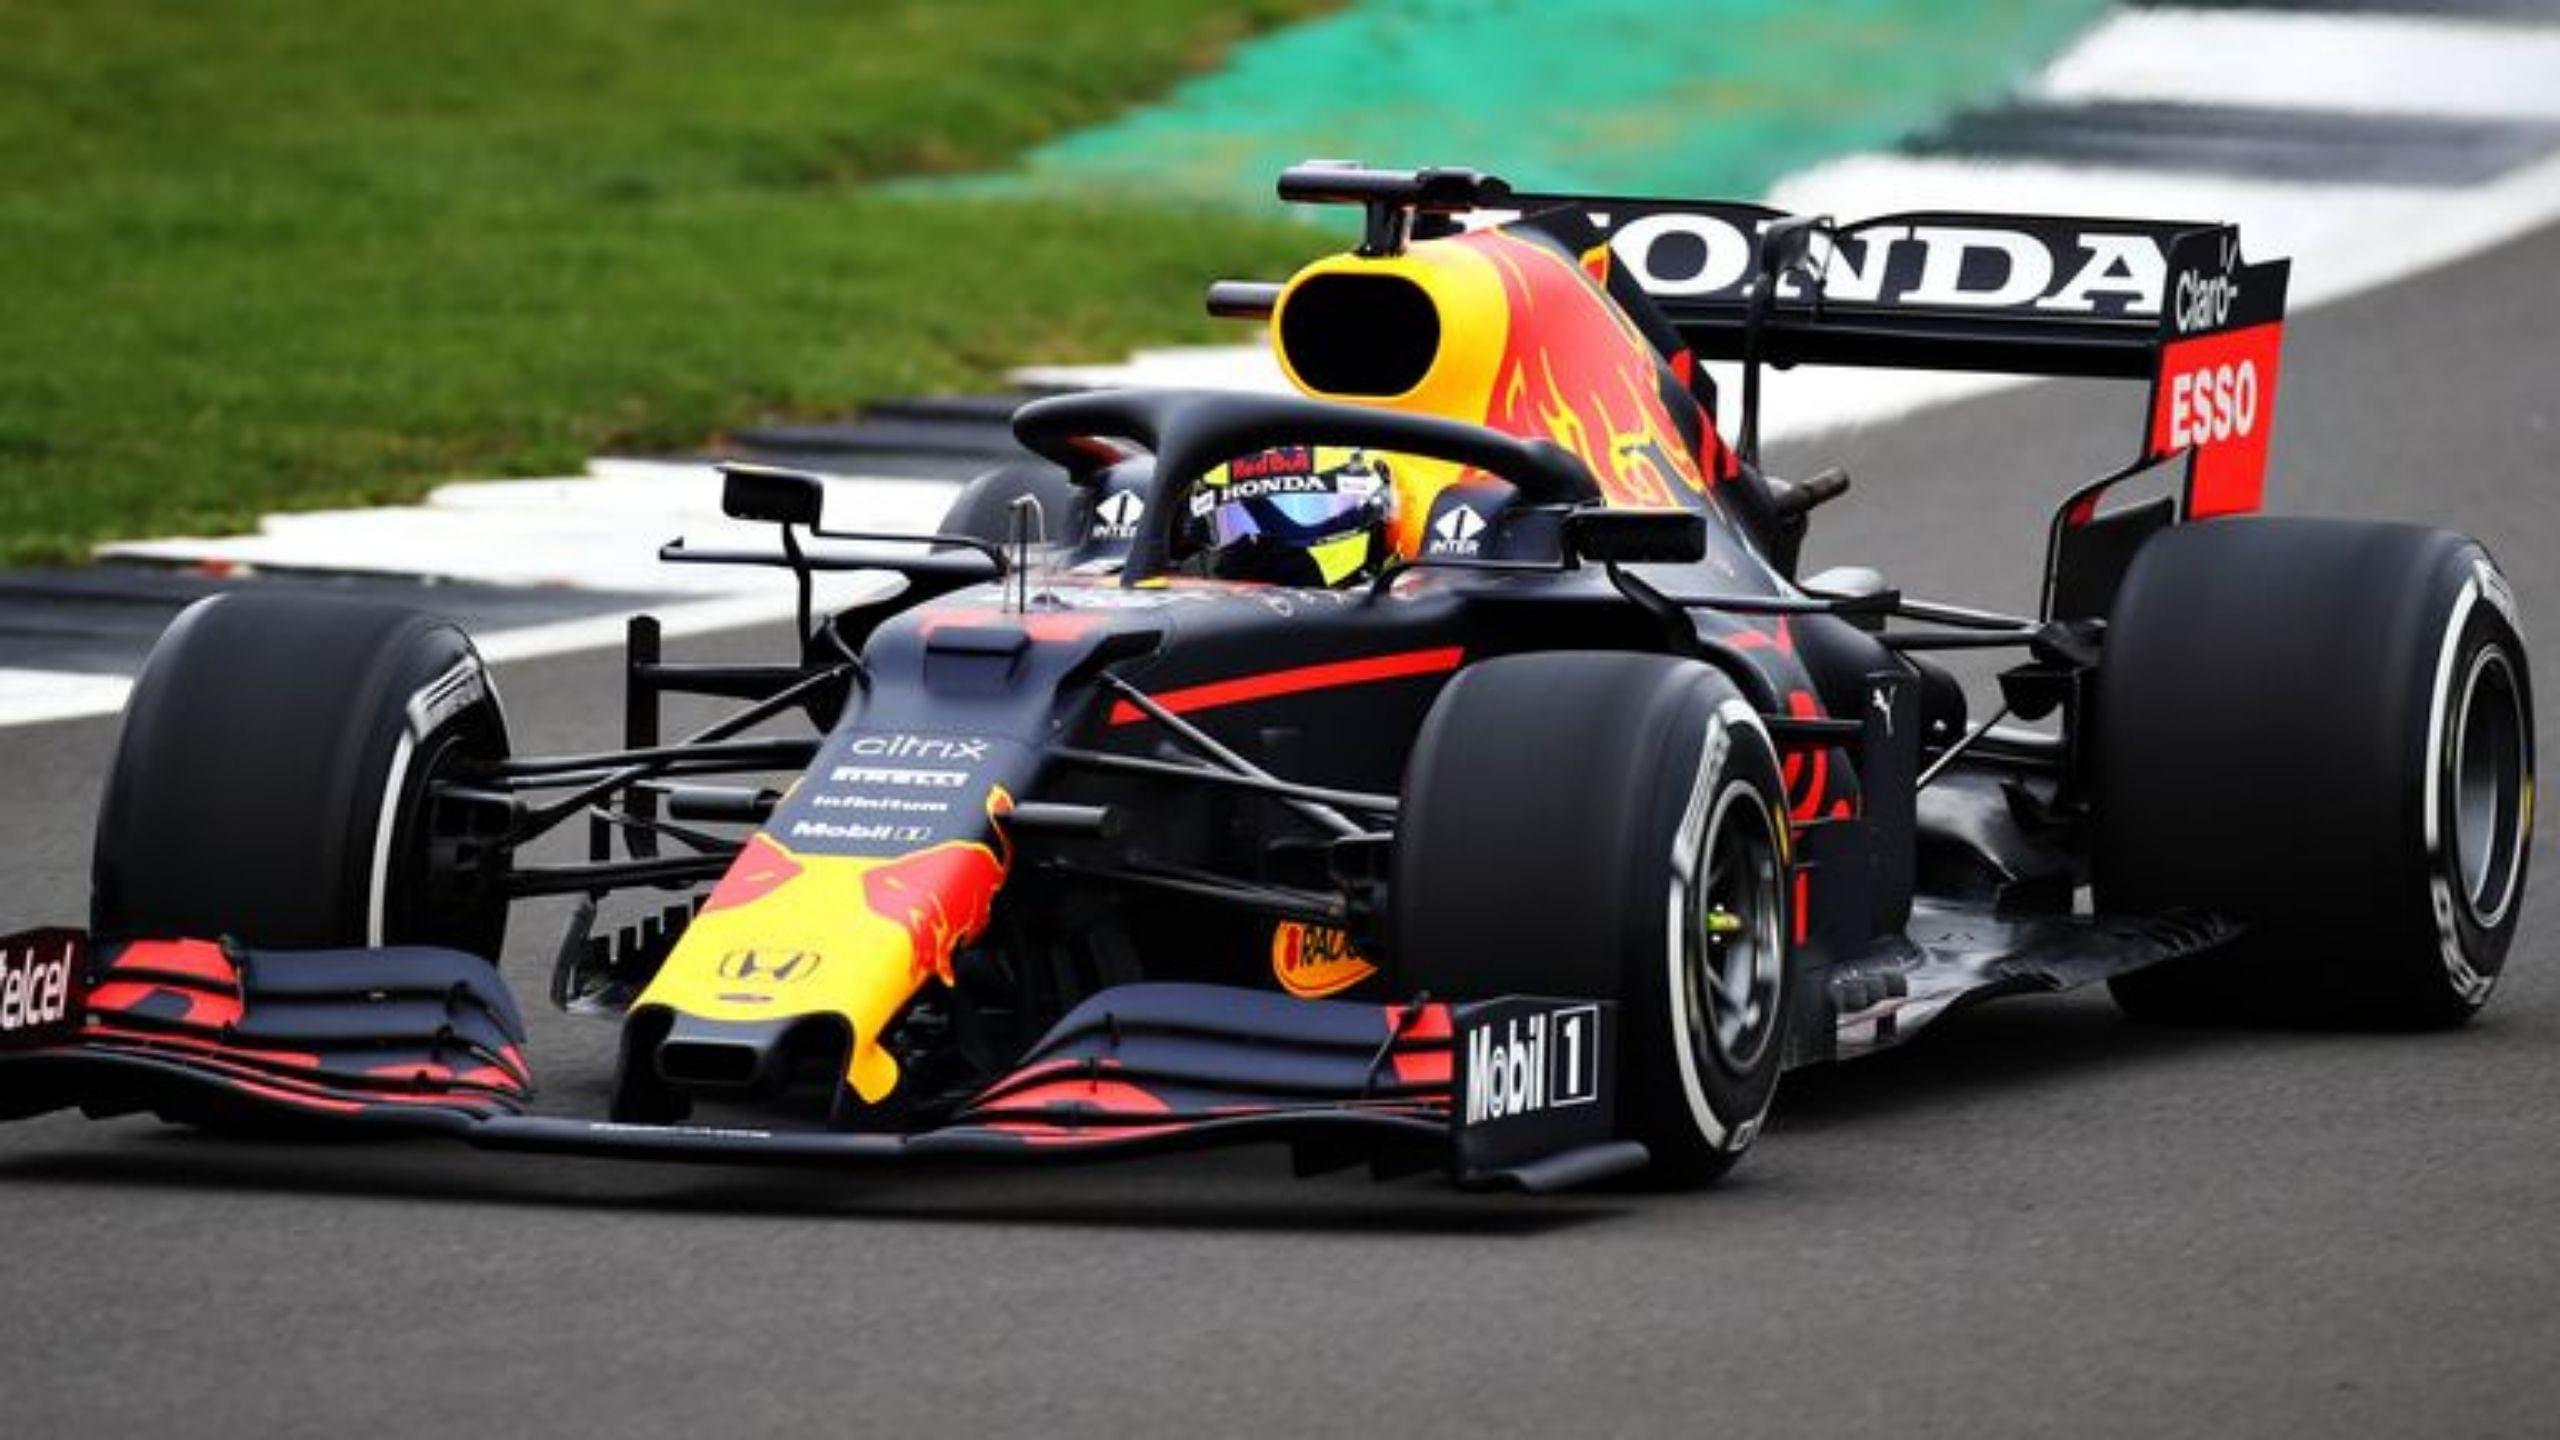 “Driving a new car is always special" - Sergio Perez and Max Verstappen take the RB16B to the track for the first time